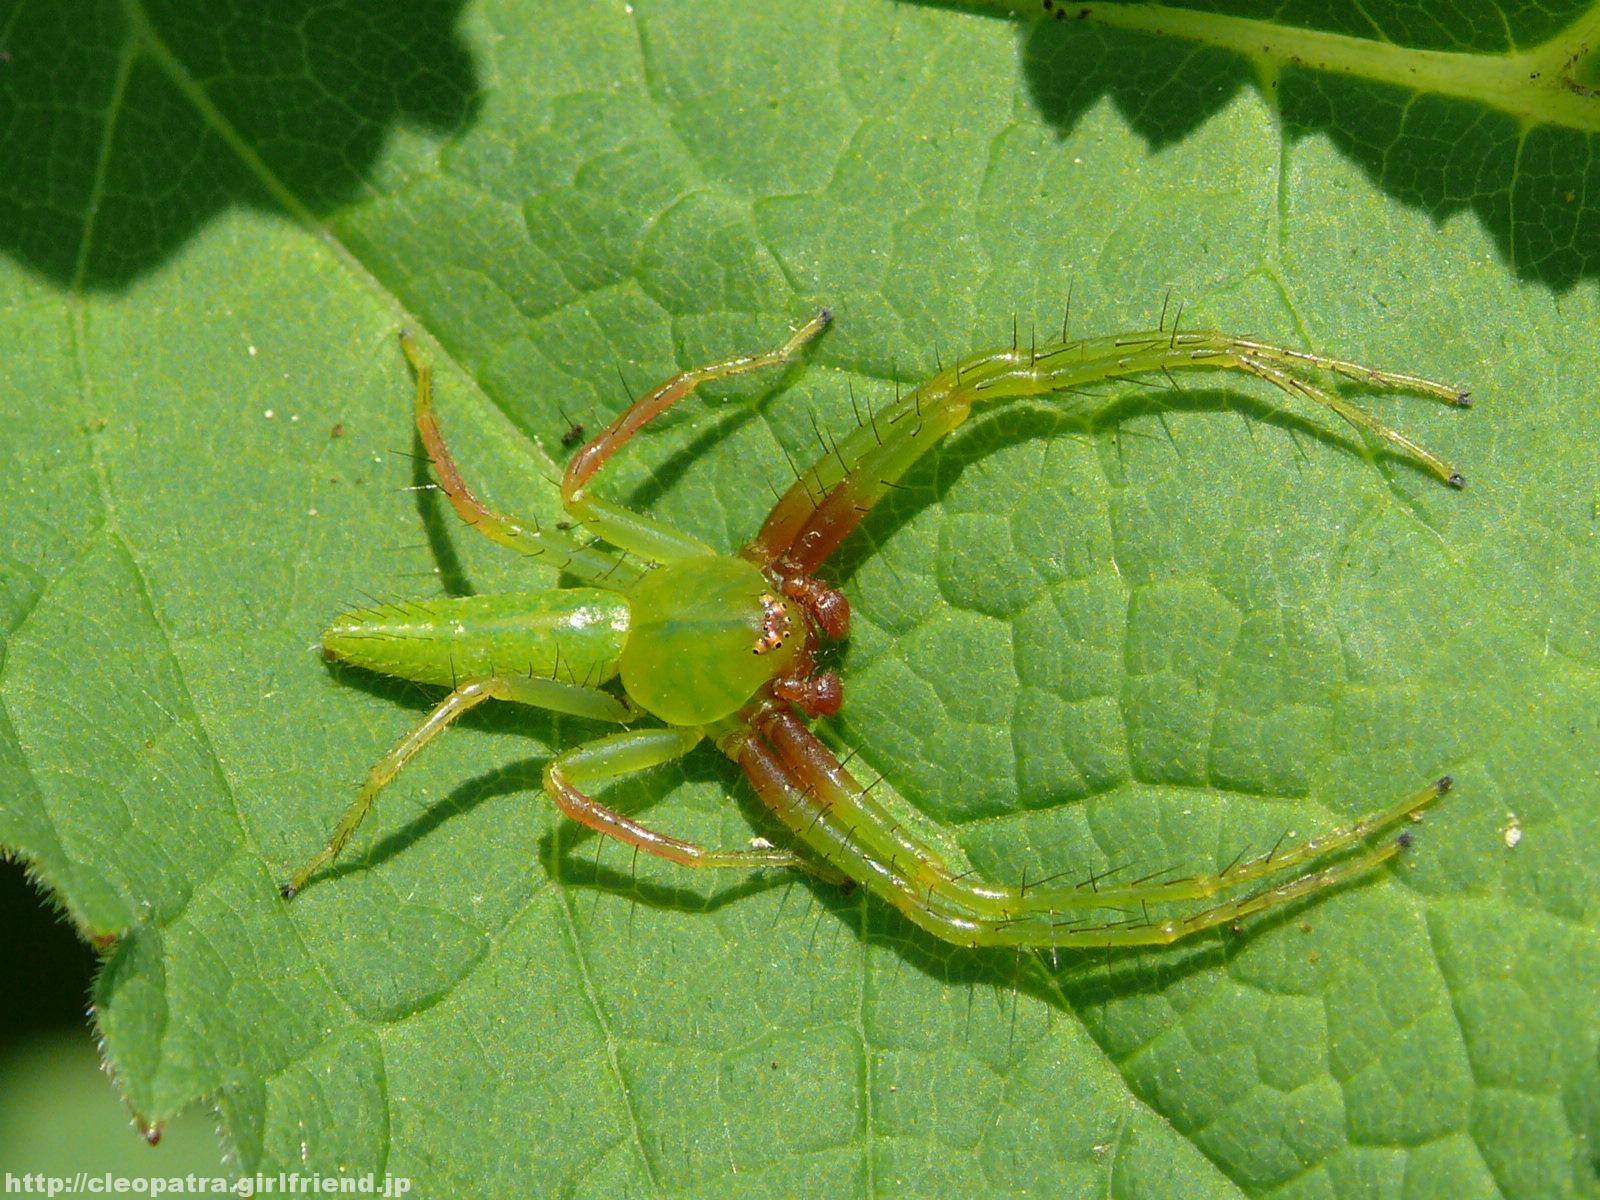 Green Crab Spider 緑色のカニグモといえばワカバグモ 3044s Insects Nature